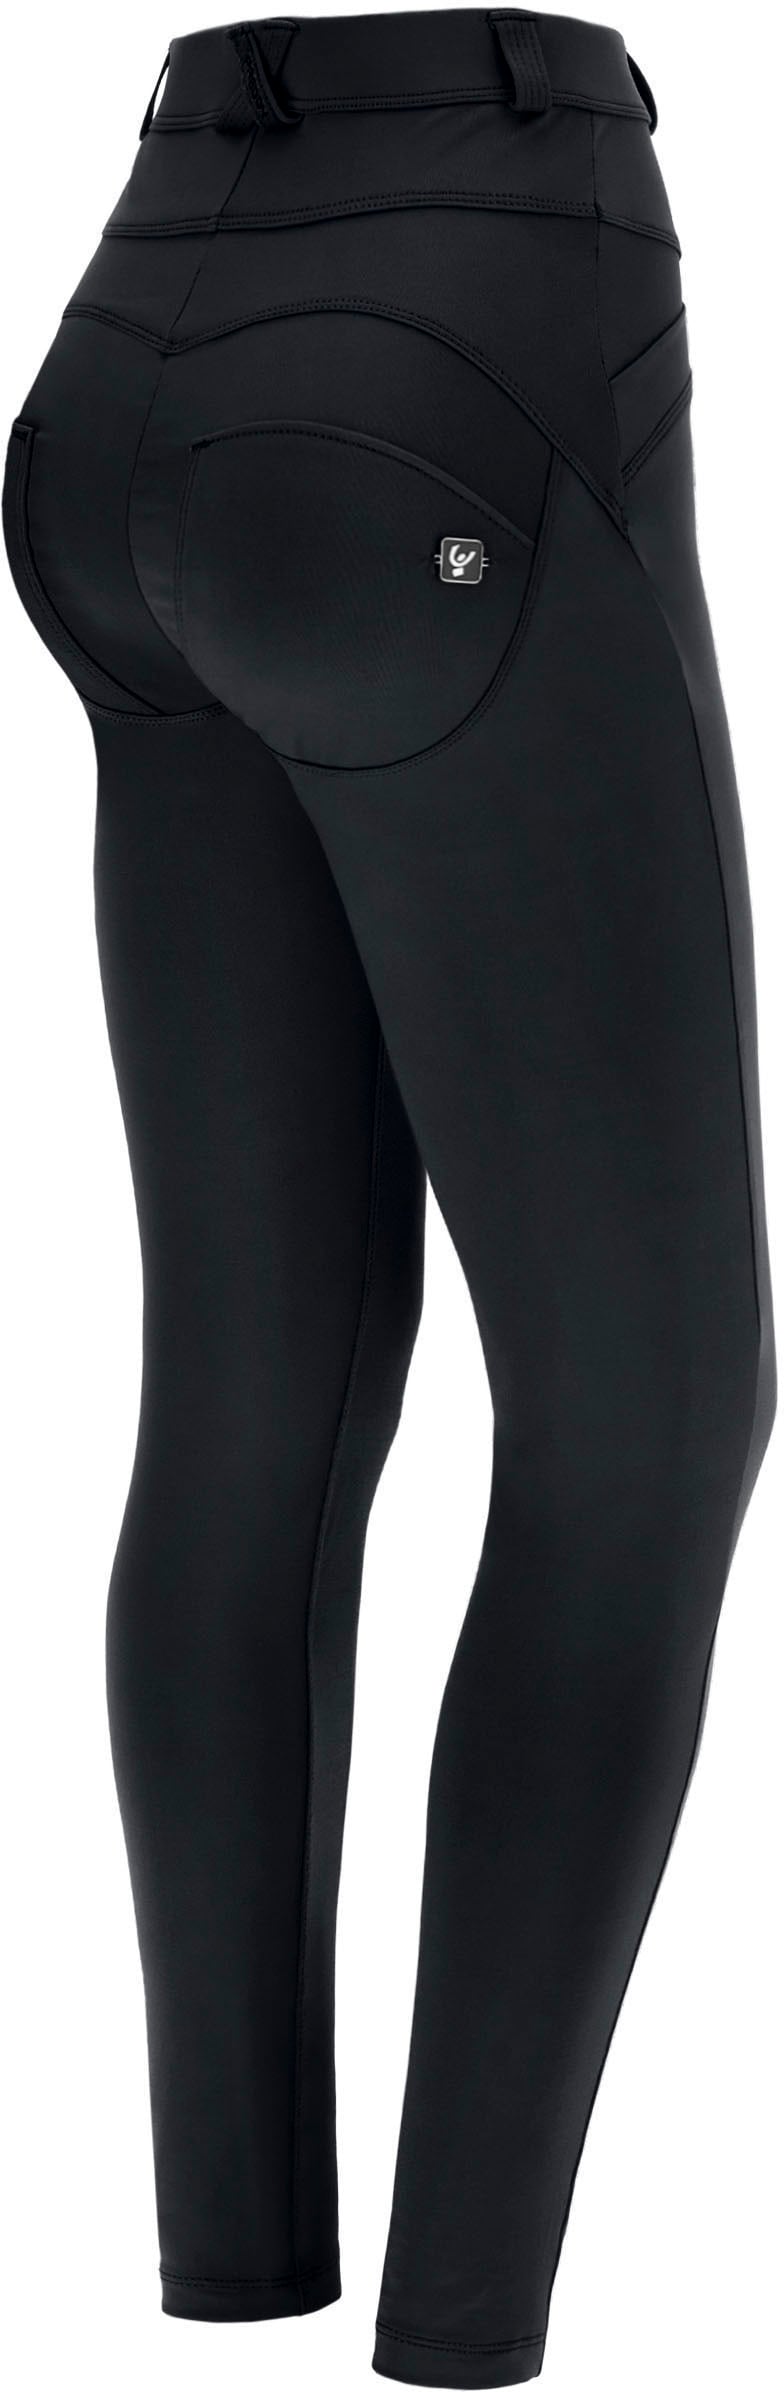 Freddy Jeggings OTTOversand Effekt SUPERSKINNY«, & bei Shaping »WRUP2 Lifting mit